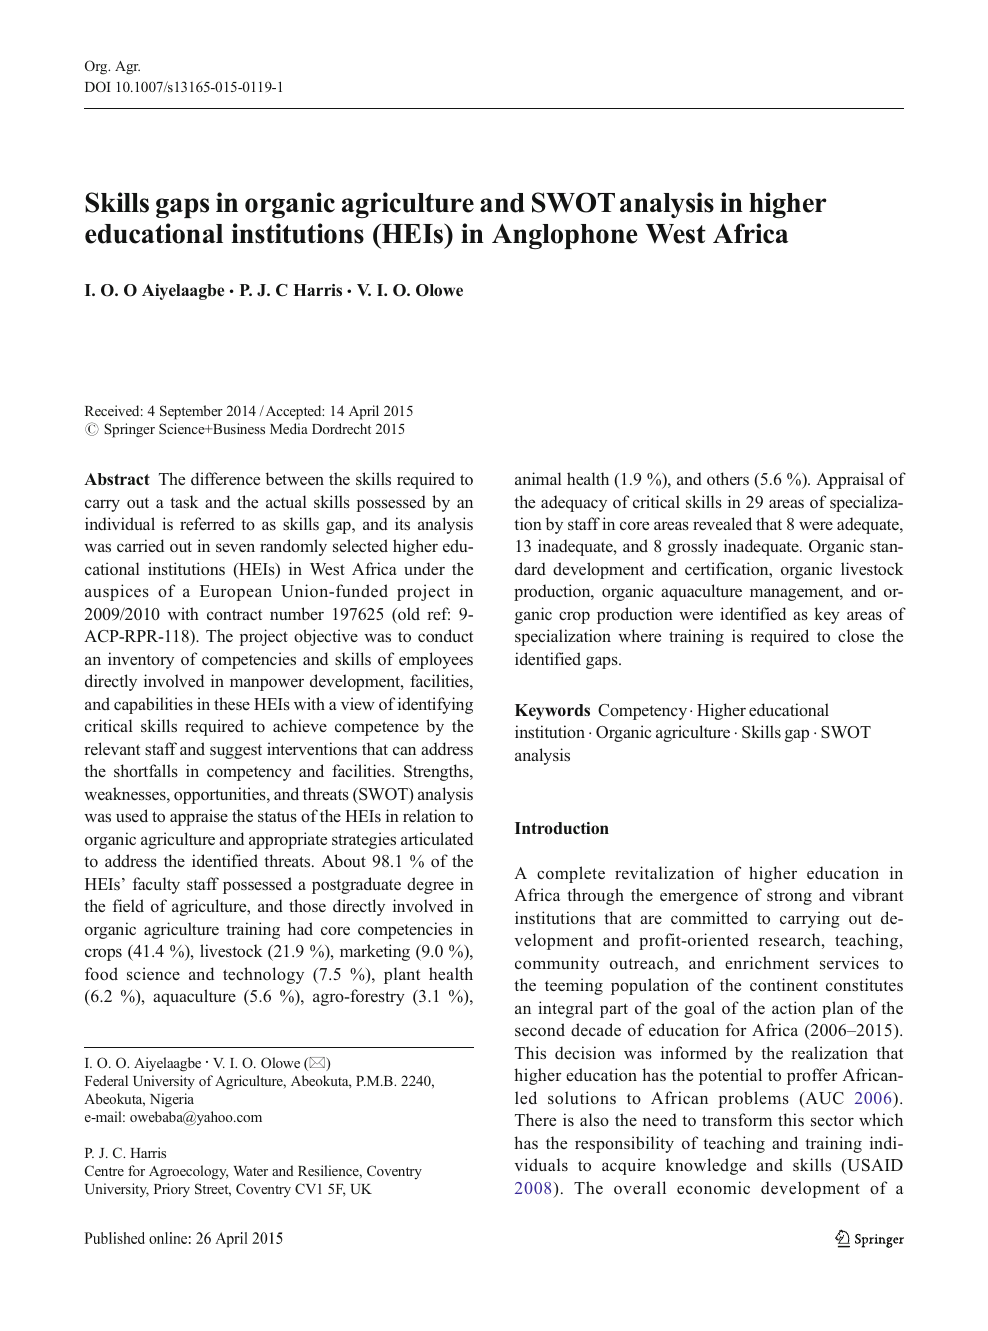 Skills Gaps In Organic Agriculture And Swot Analysis In Higher Educational Institutions Heis In Anglophone West Africa Topic Of Research Paper In Agriculture Forestry And Fisheries Download Scholarly Article Pdf And